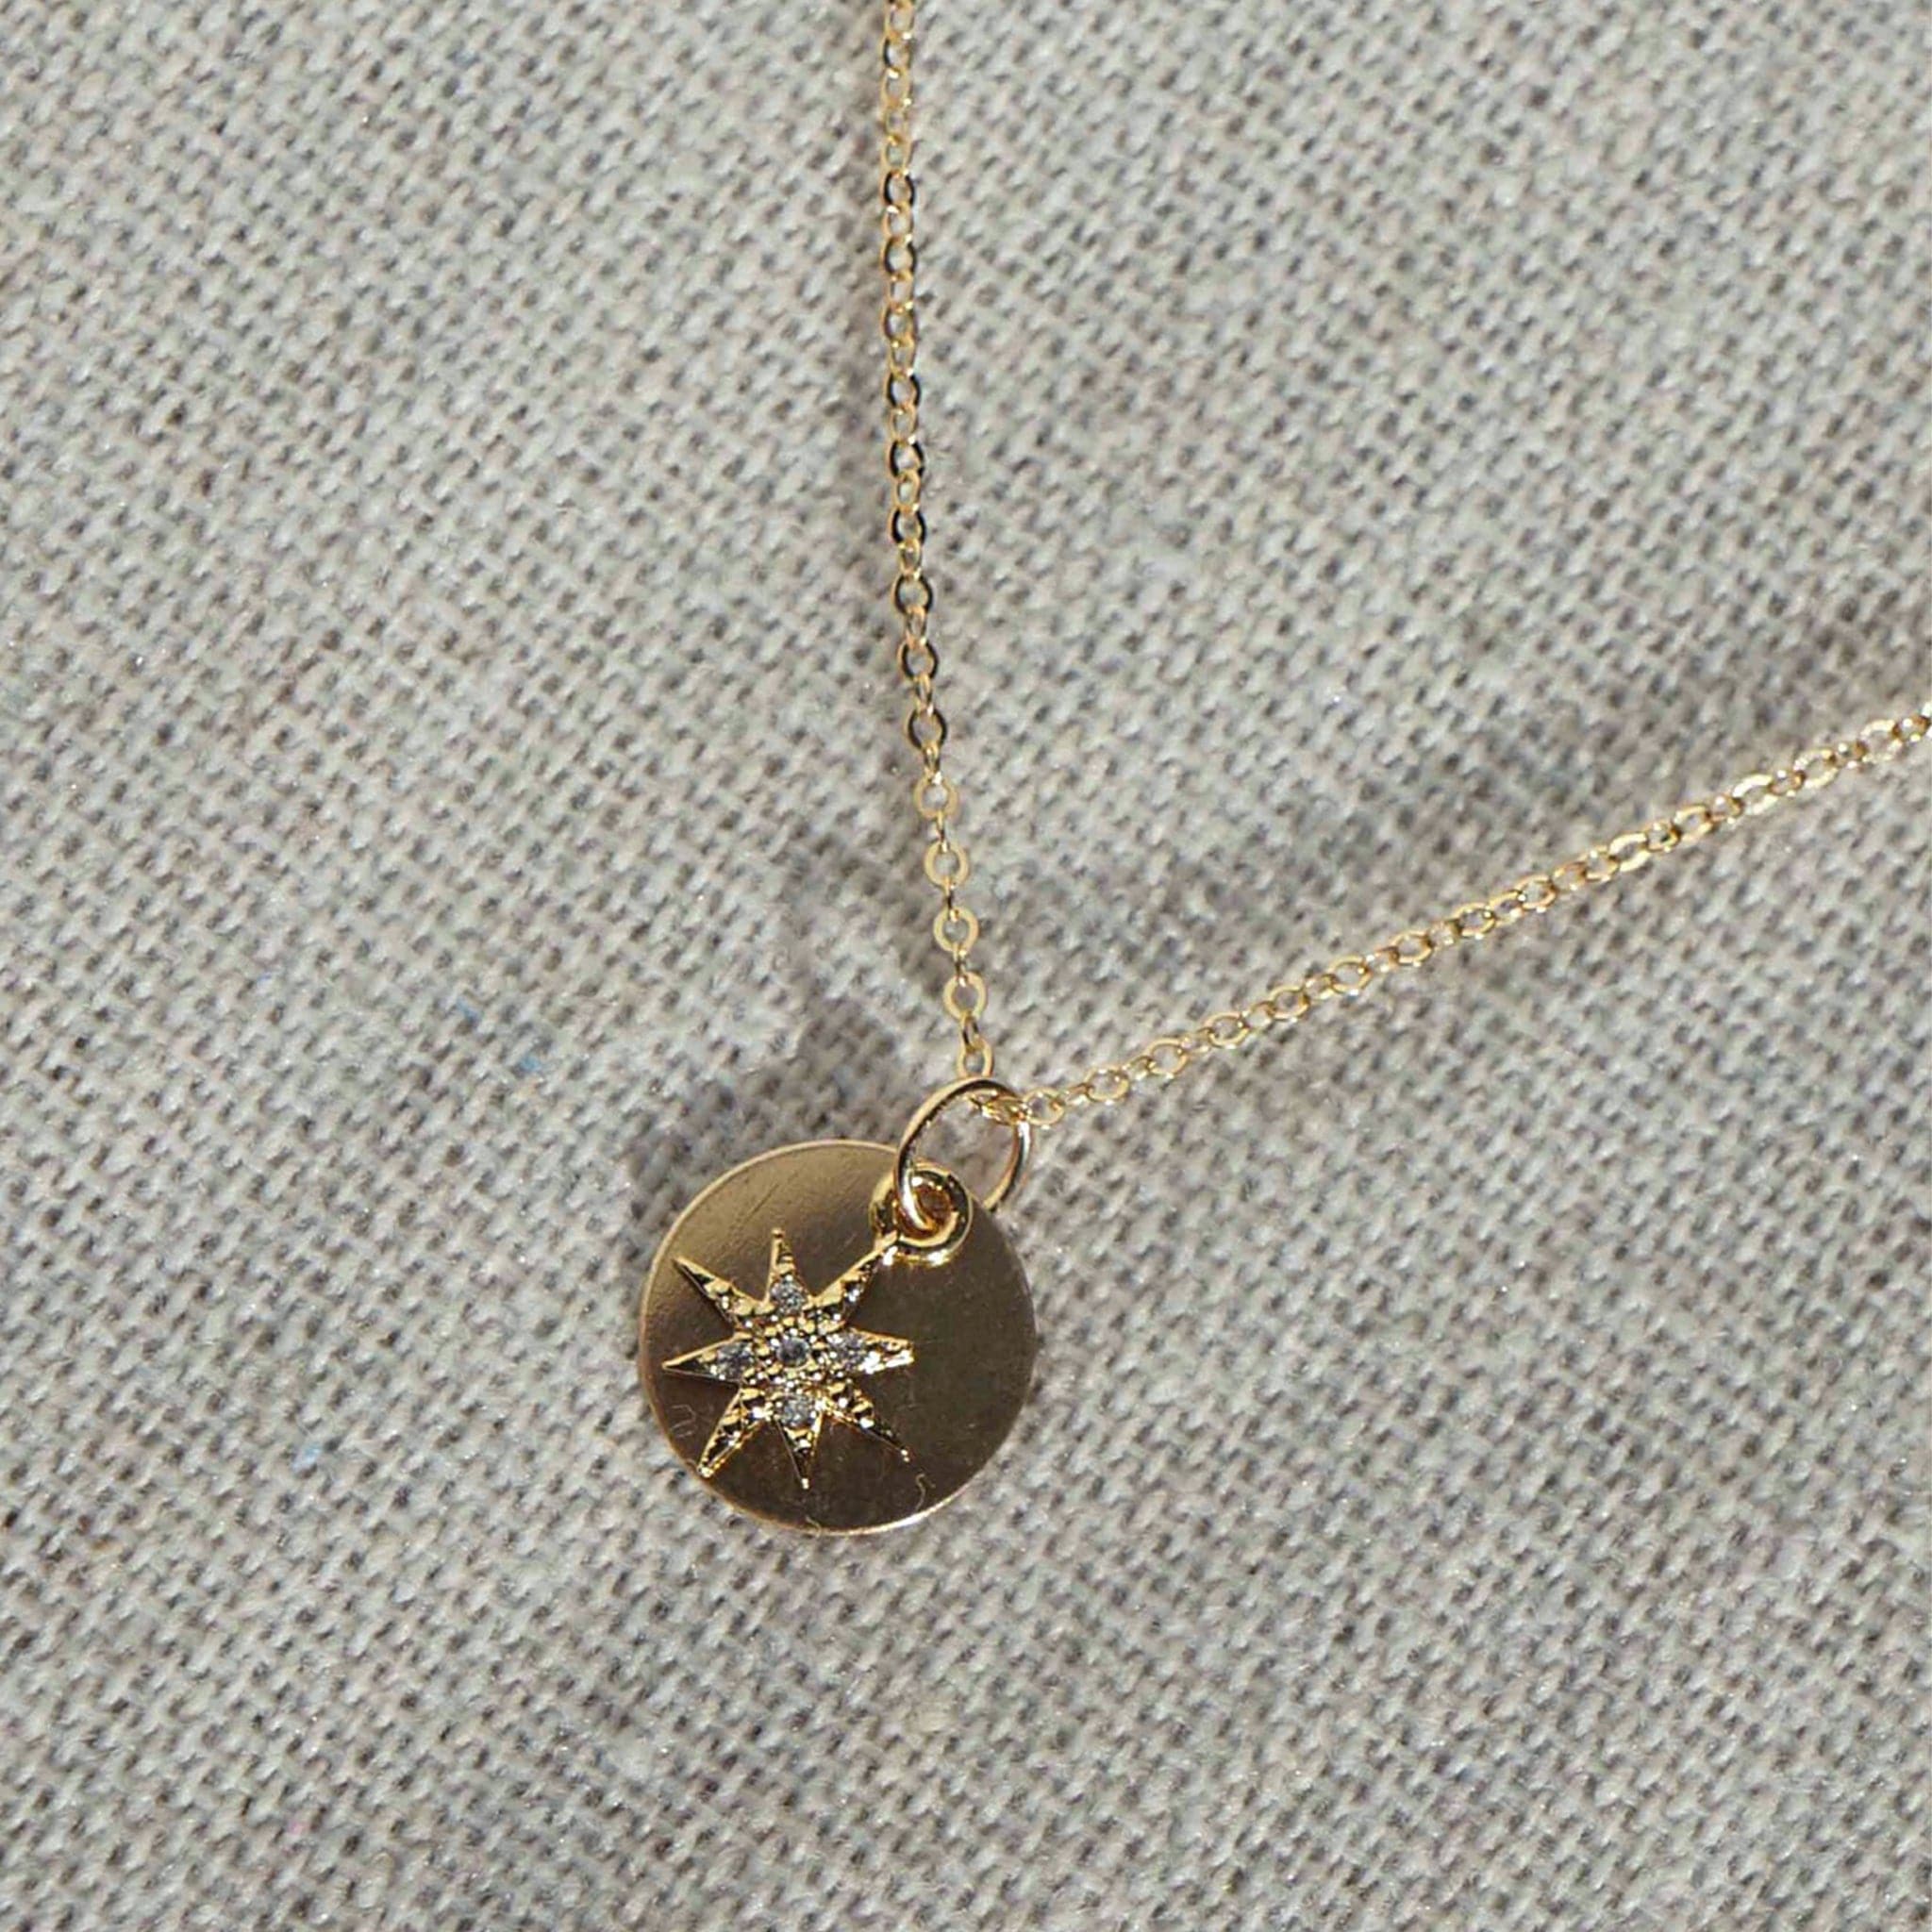 Long gold chain and circle gold pendant with crystal gemmed star charm.